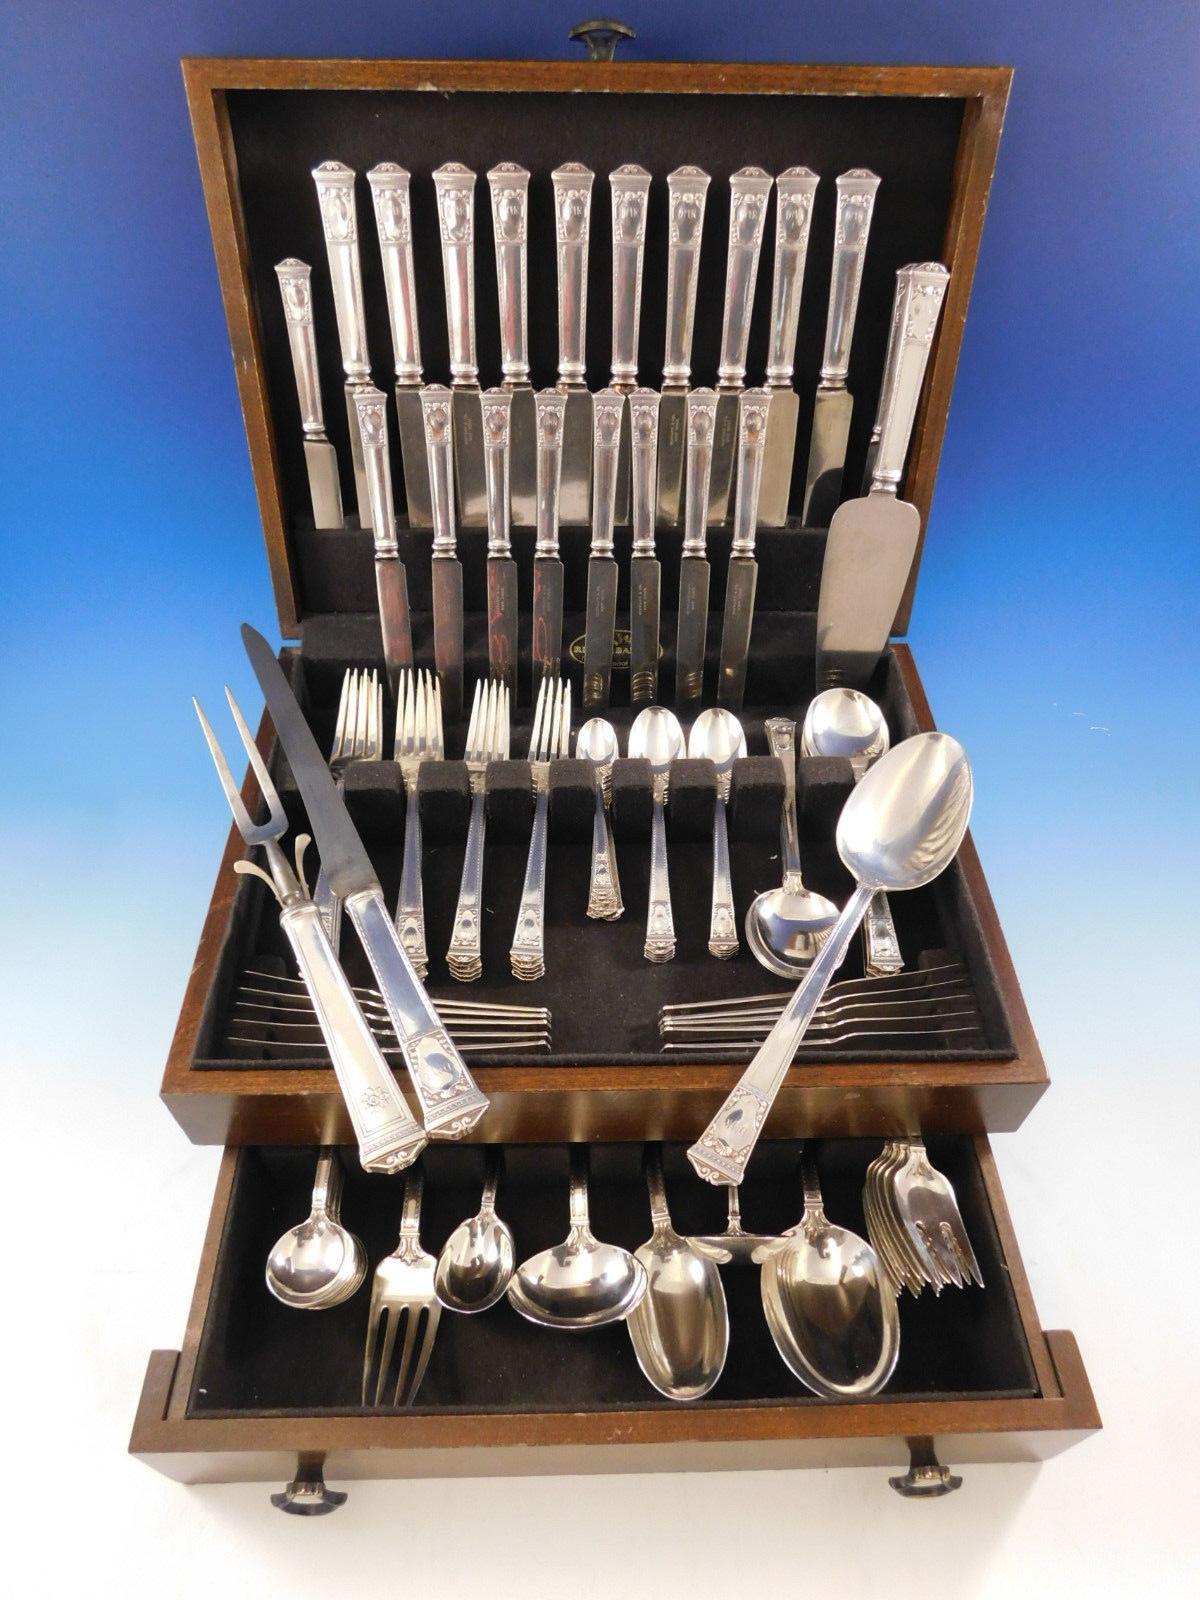 Monumental San Lorenzo by Tiffany & Co. Sterling Silver flatware set - 110 pieces. This set includes:

10 Knives, 9 3/8